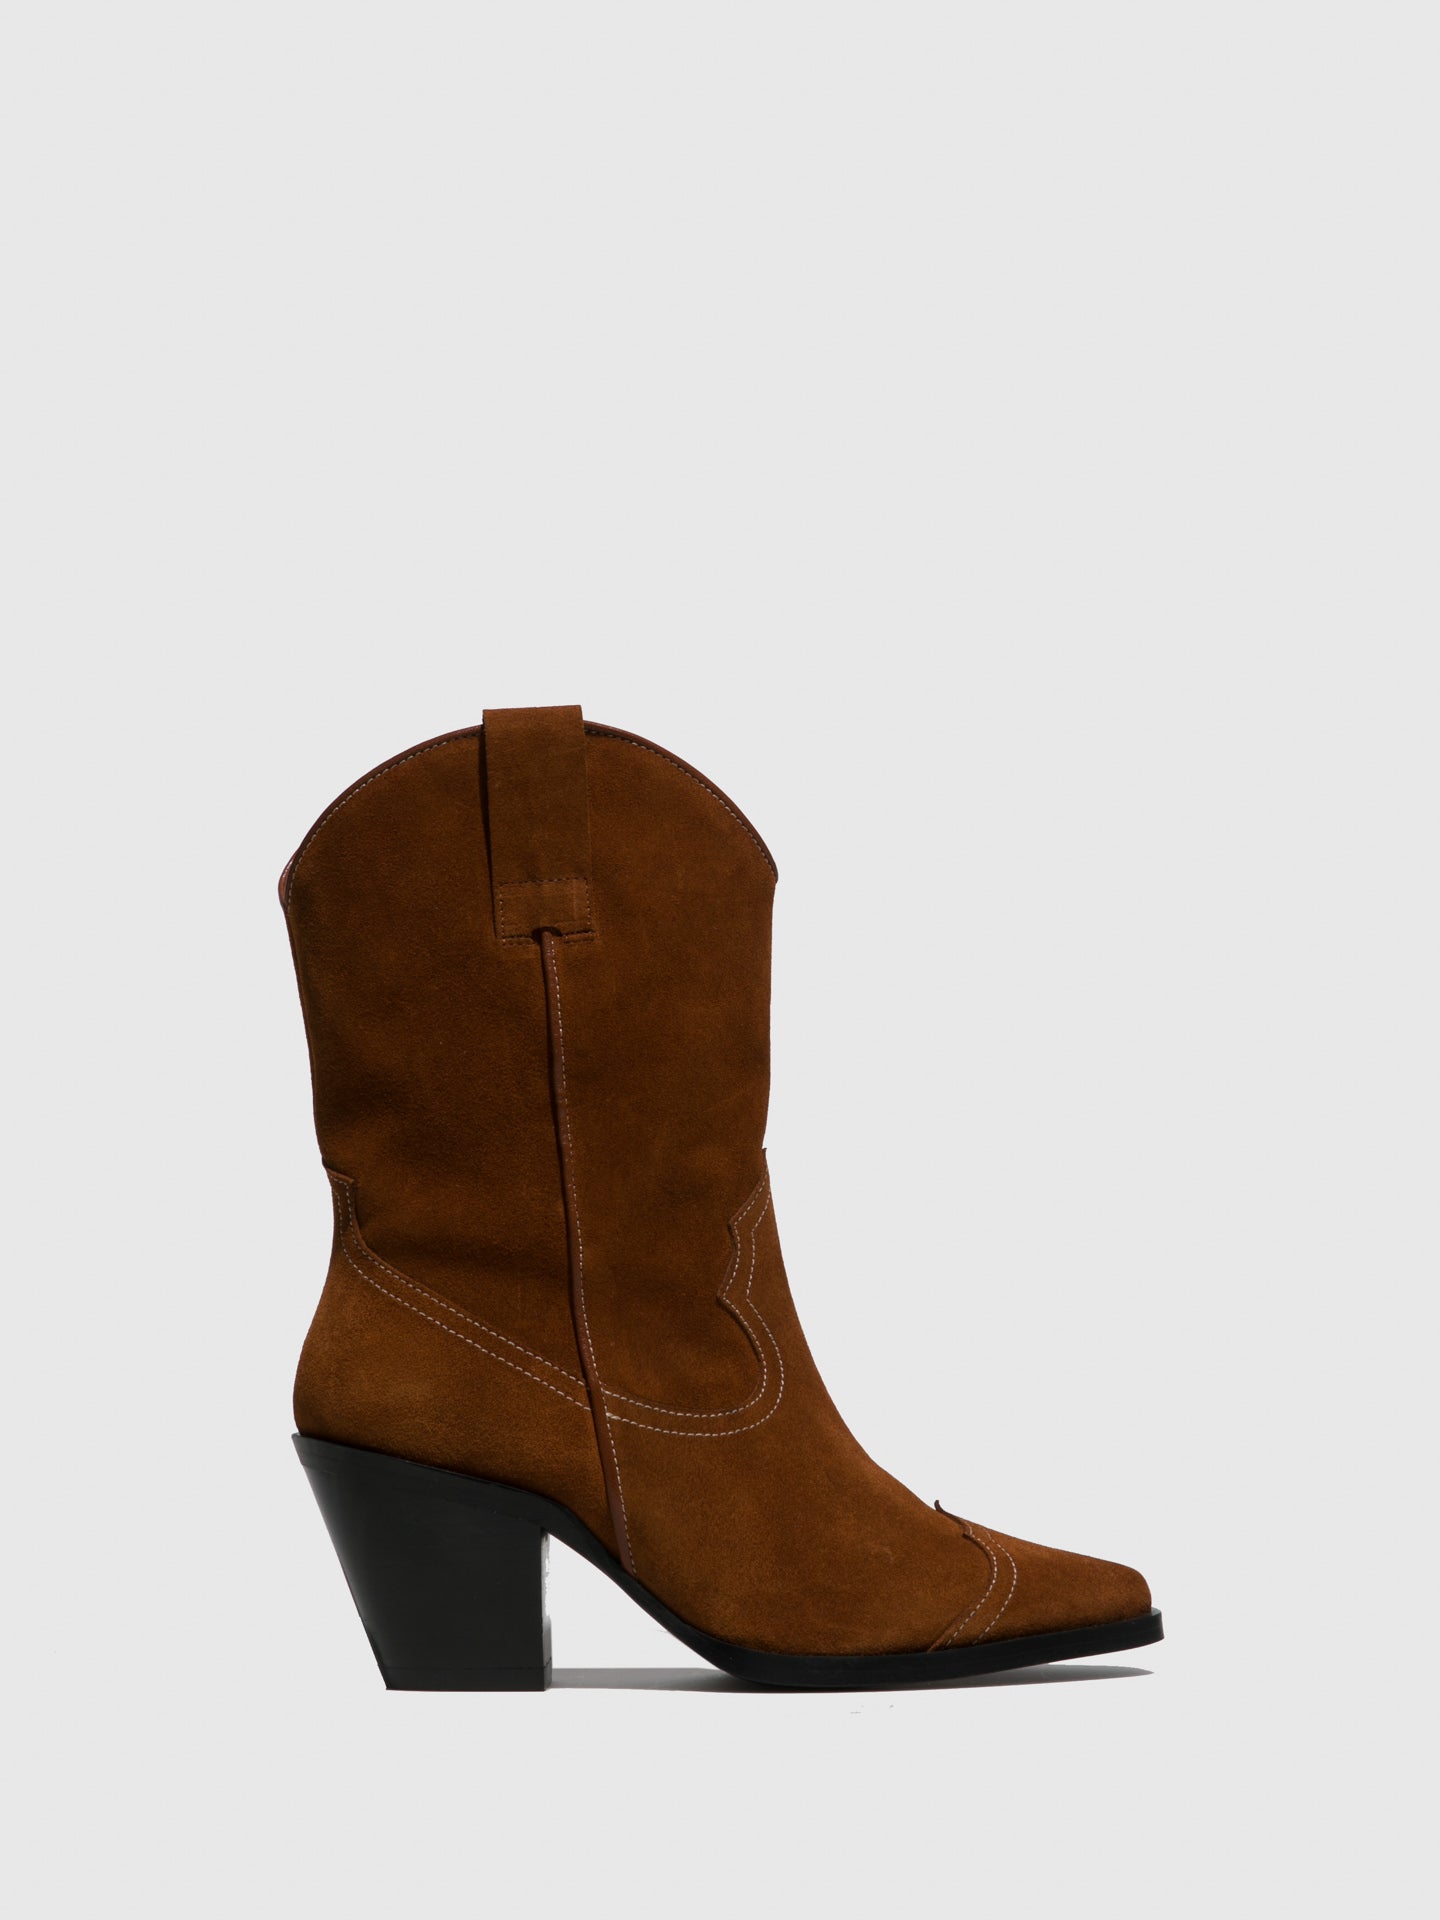 Sofia Costa Brown Cowboy Ankle Boots